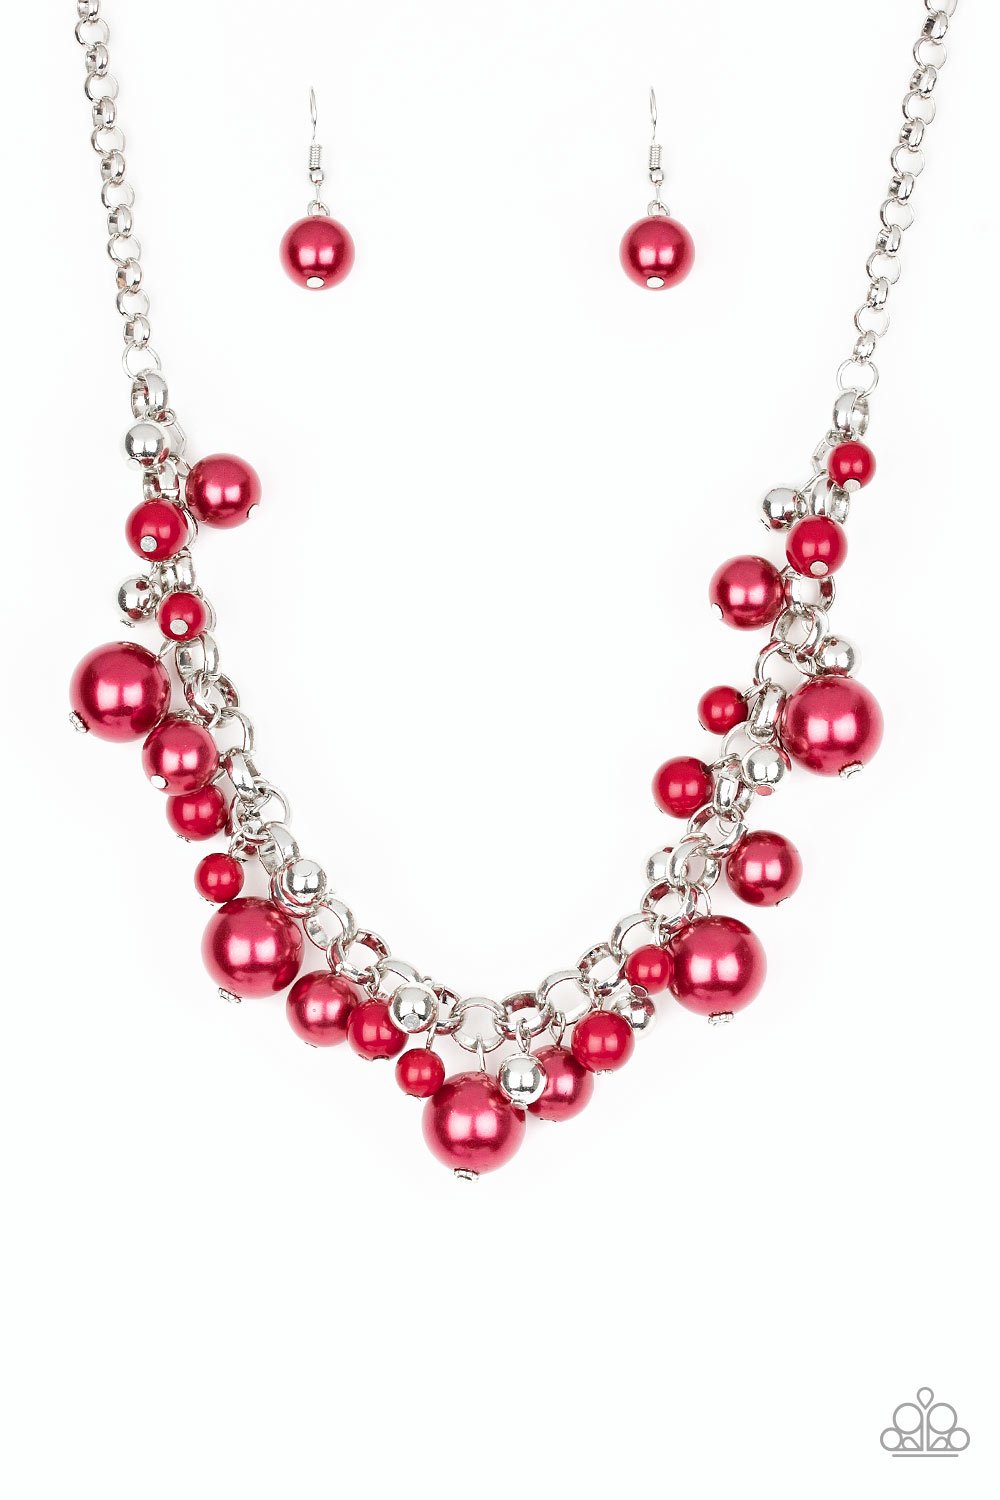 Paparazzi Necklace ~ The Upstater